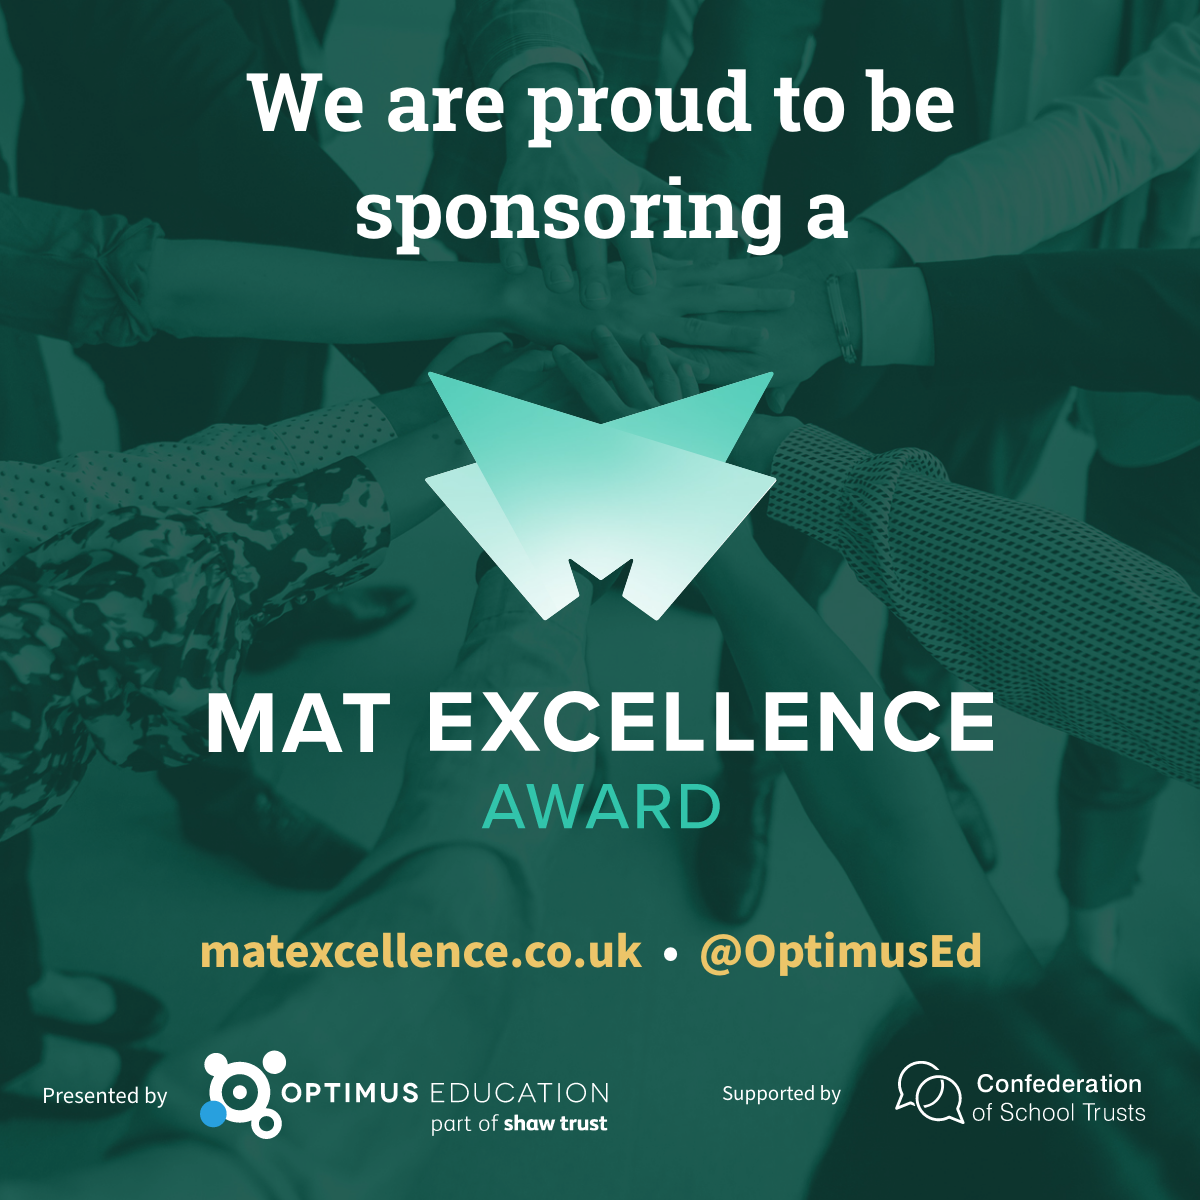 We are proud to be sponsoring a MAT Excellence Award